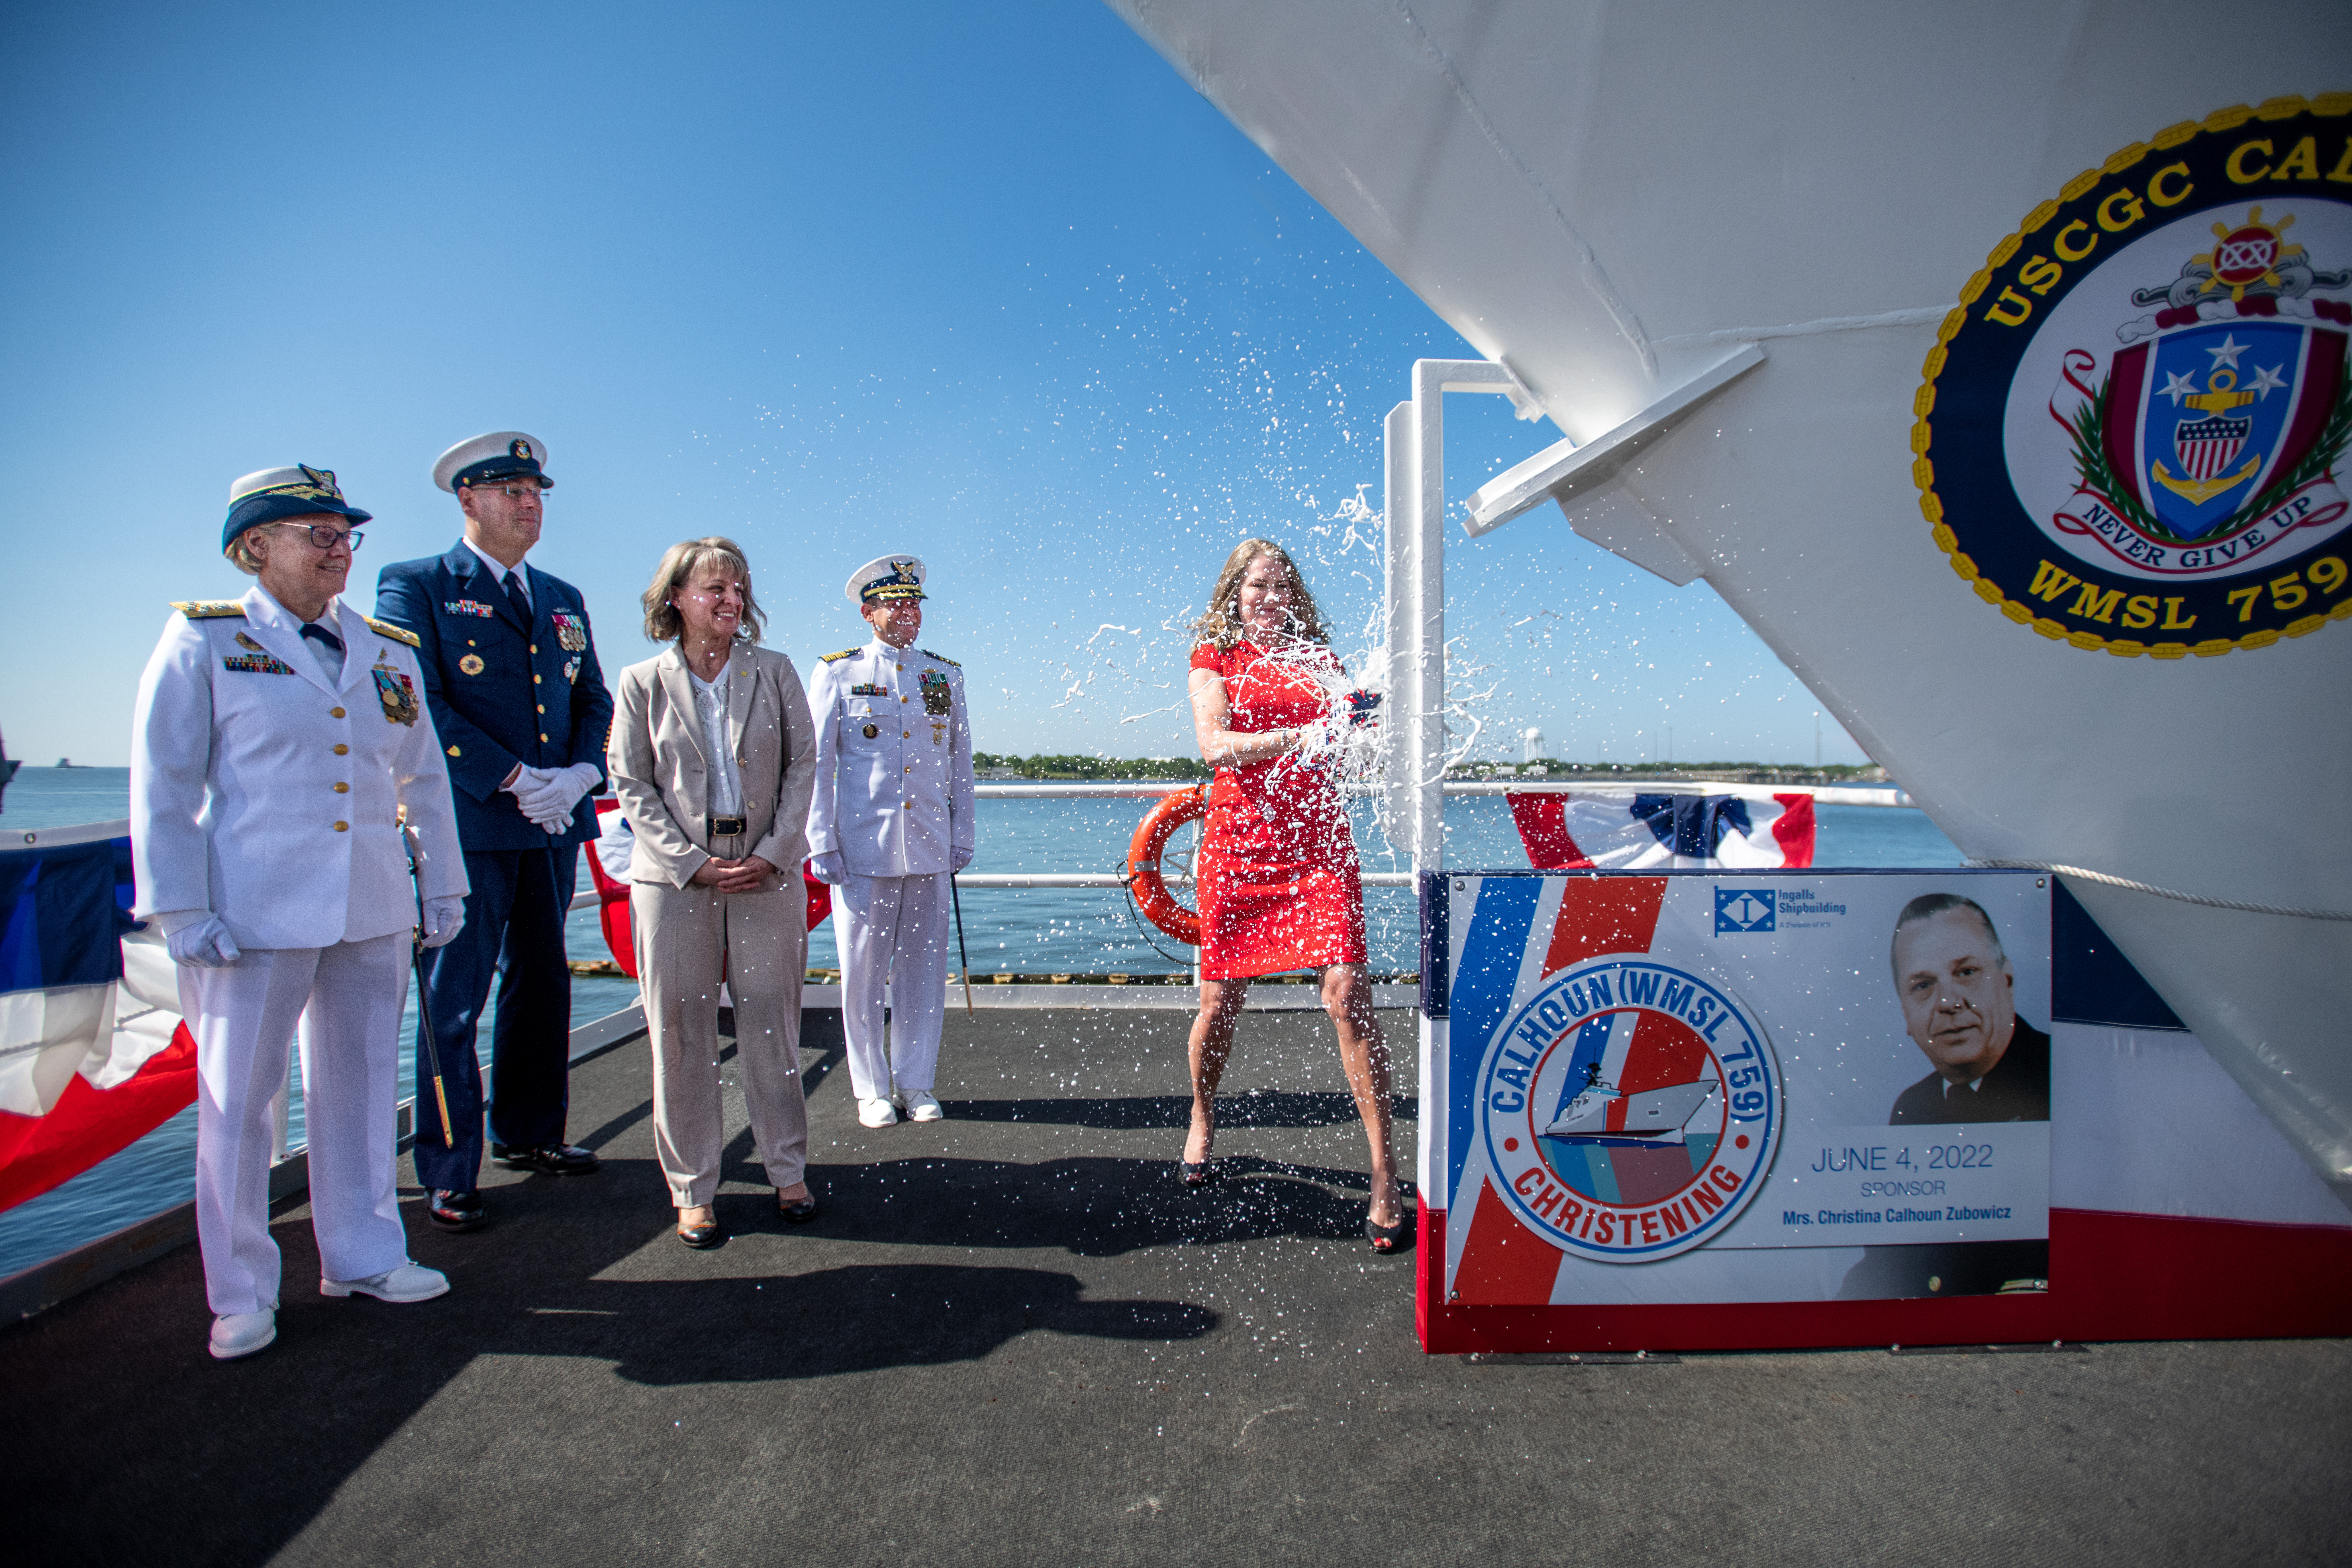 Ship's Sponsor Mrs. Christina Calhoun Zubowicz christened the U.S. Coast Guard’s 10th national security cutter Calhoun (WMSL 759) at HII’s Ingalls Shipbuilding division. NSC 10 Calhoun is named for Zubowicz’s grandfather, Charles L. Calhoun, the first Master Chief Petty Officer of the Coast Guard. Also pictured are Commandant of the Coast Guard, Adm. Linda Fagan, Master Chief Petty Officer of the Coast Guard Heath Jones, Ingalls Shipbuilding President, Kari Wilkinson, and Capt. Timothy Sommella, prospective commanding officer, Calhoun.